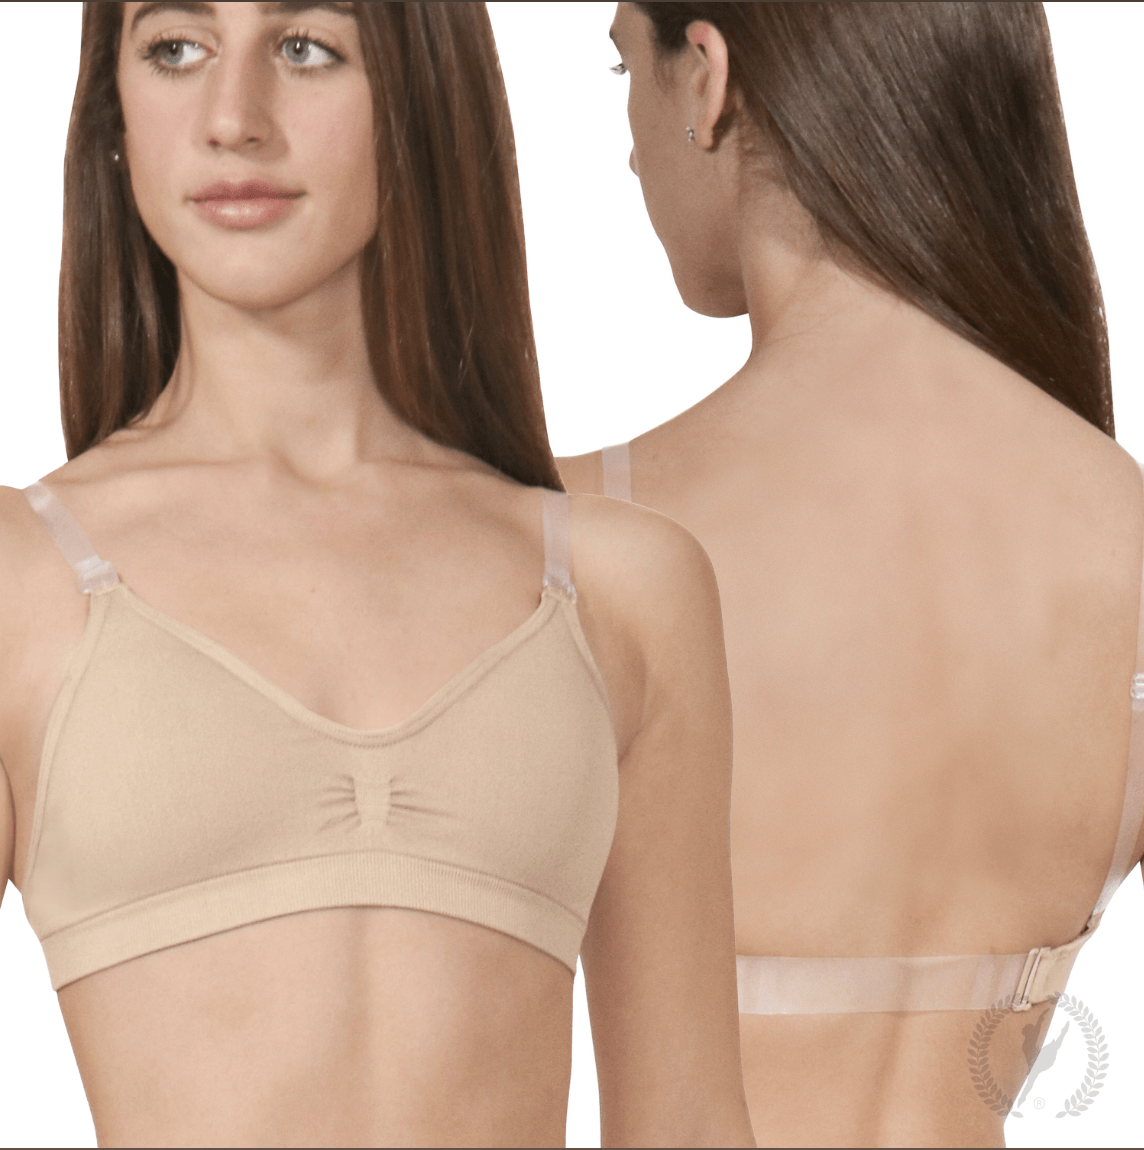 Dance Accessories - Body Wrappers Padded Bra - Nude - Medium - BW274